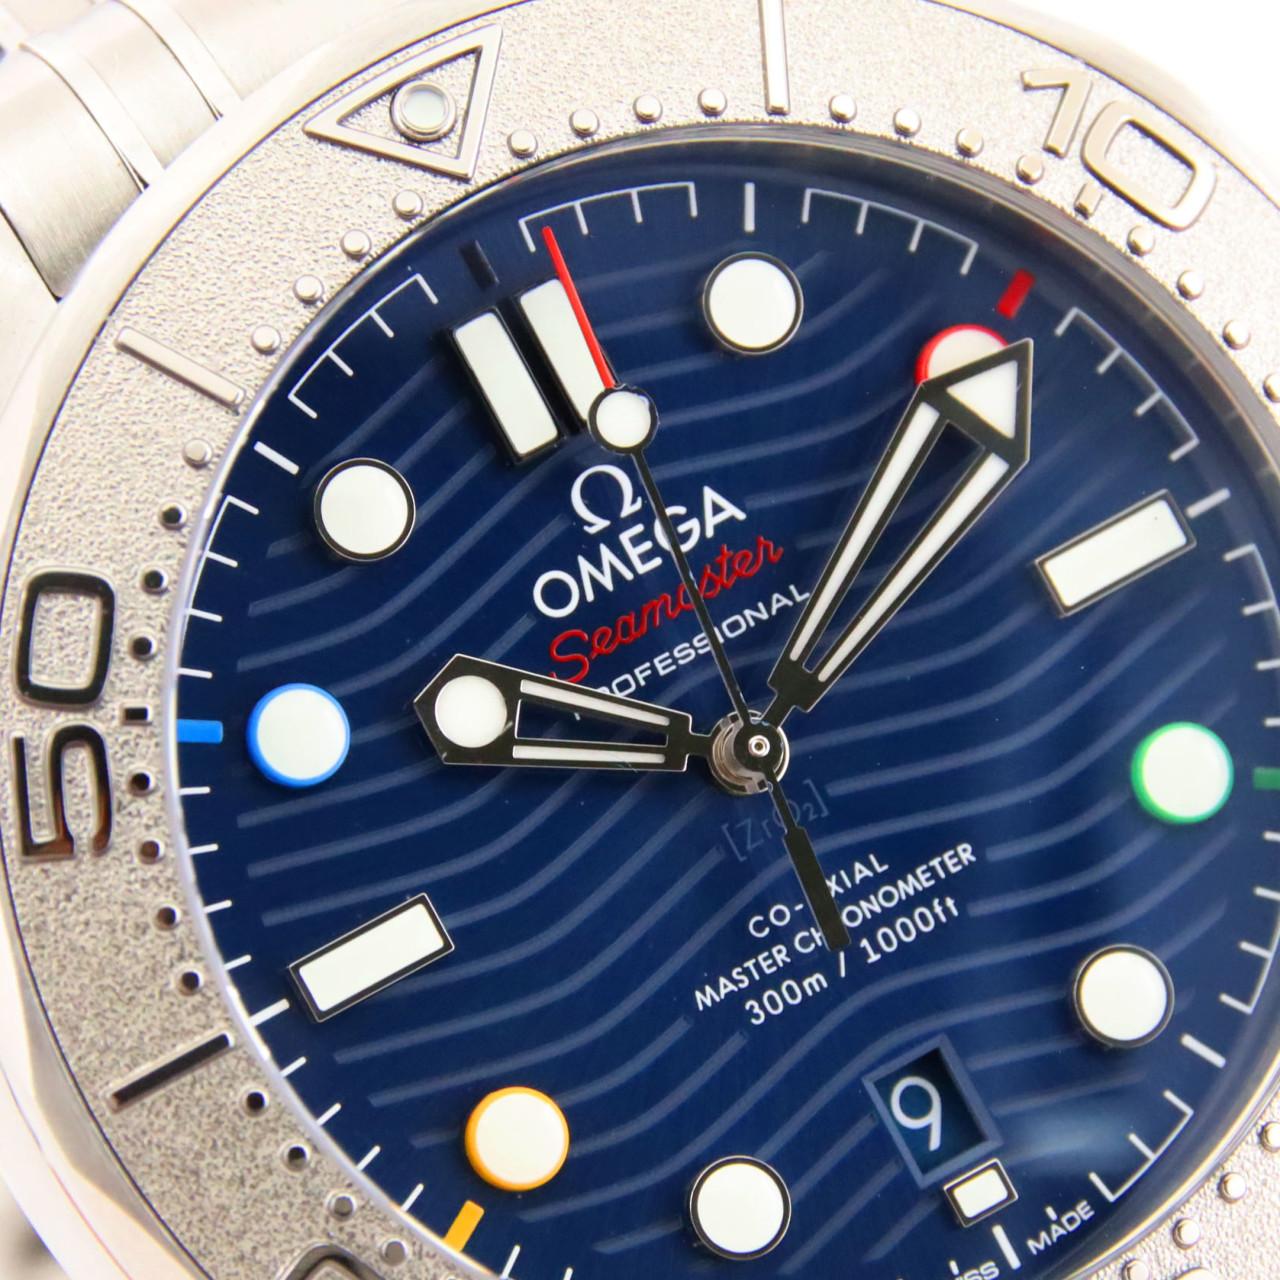 Omega Seamaster Diver 300M Beijing 2022 522.30.42.20.03.001 SS Automatic